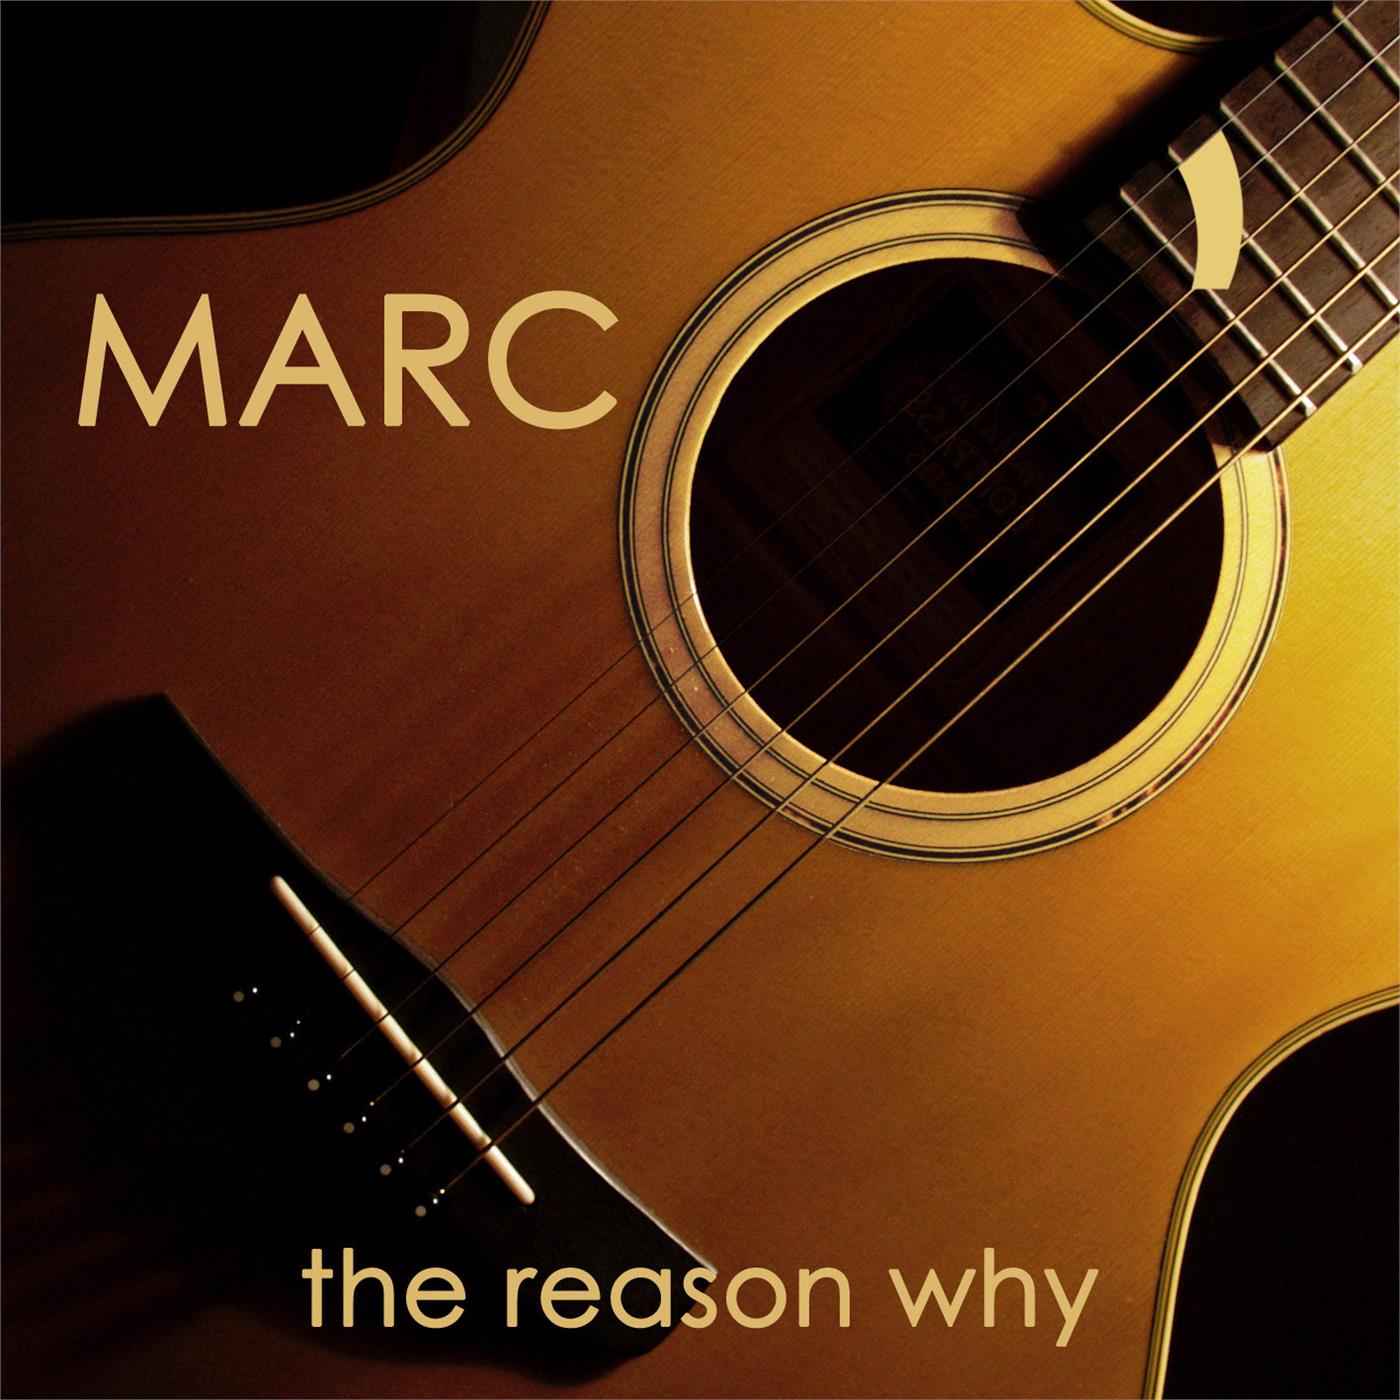 The reason why